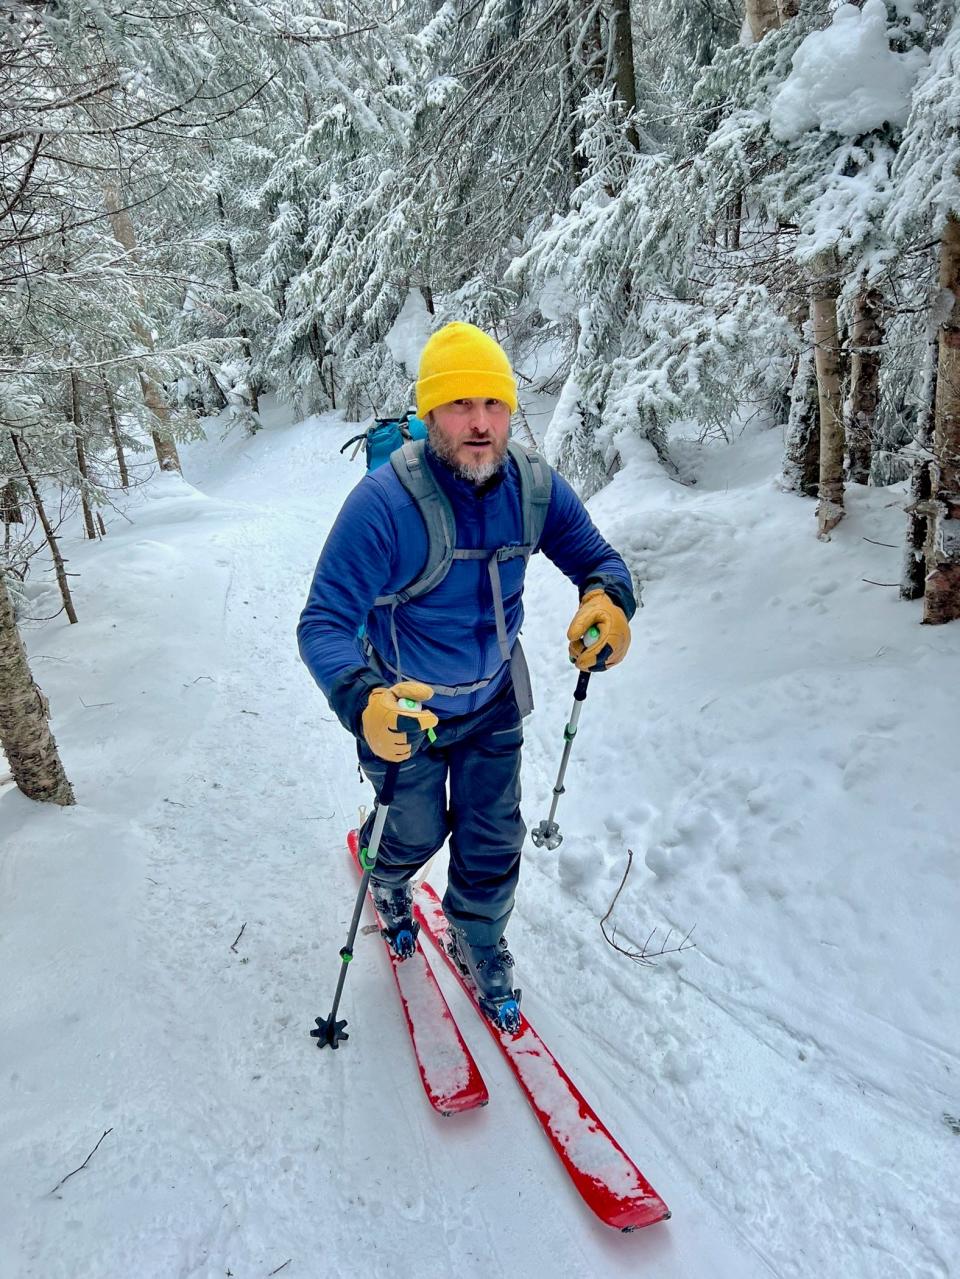 Western Mass Backcountry Alliance founder Andy Mathey has been instrumental in helping create two top-notch backcountry skiing zones in Western Massachusetts.